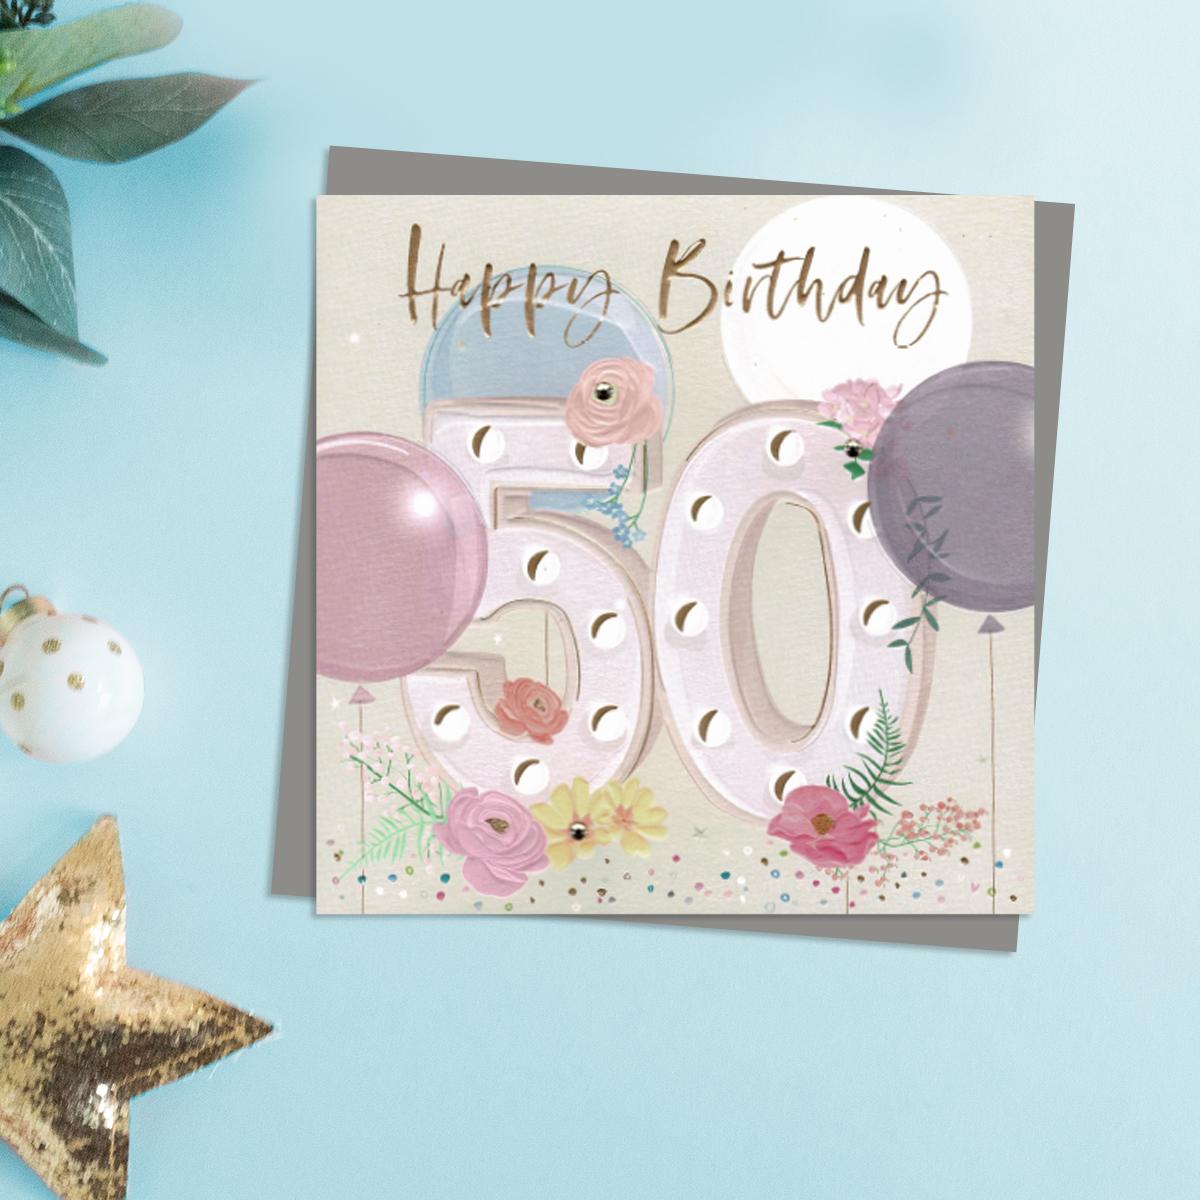 Happy 50th Birthday Card . Pastel Colours And Embellishments Depicting Flowers And Balloons. Complete With Co-Ordinating Grey Envelope